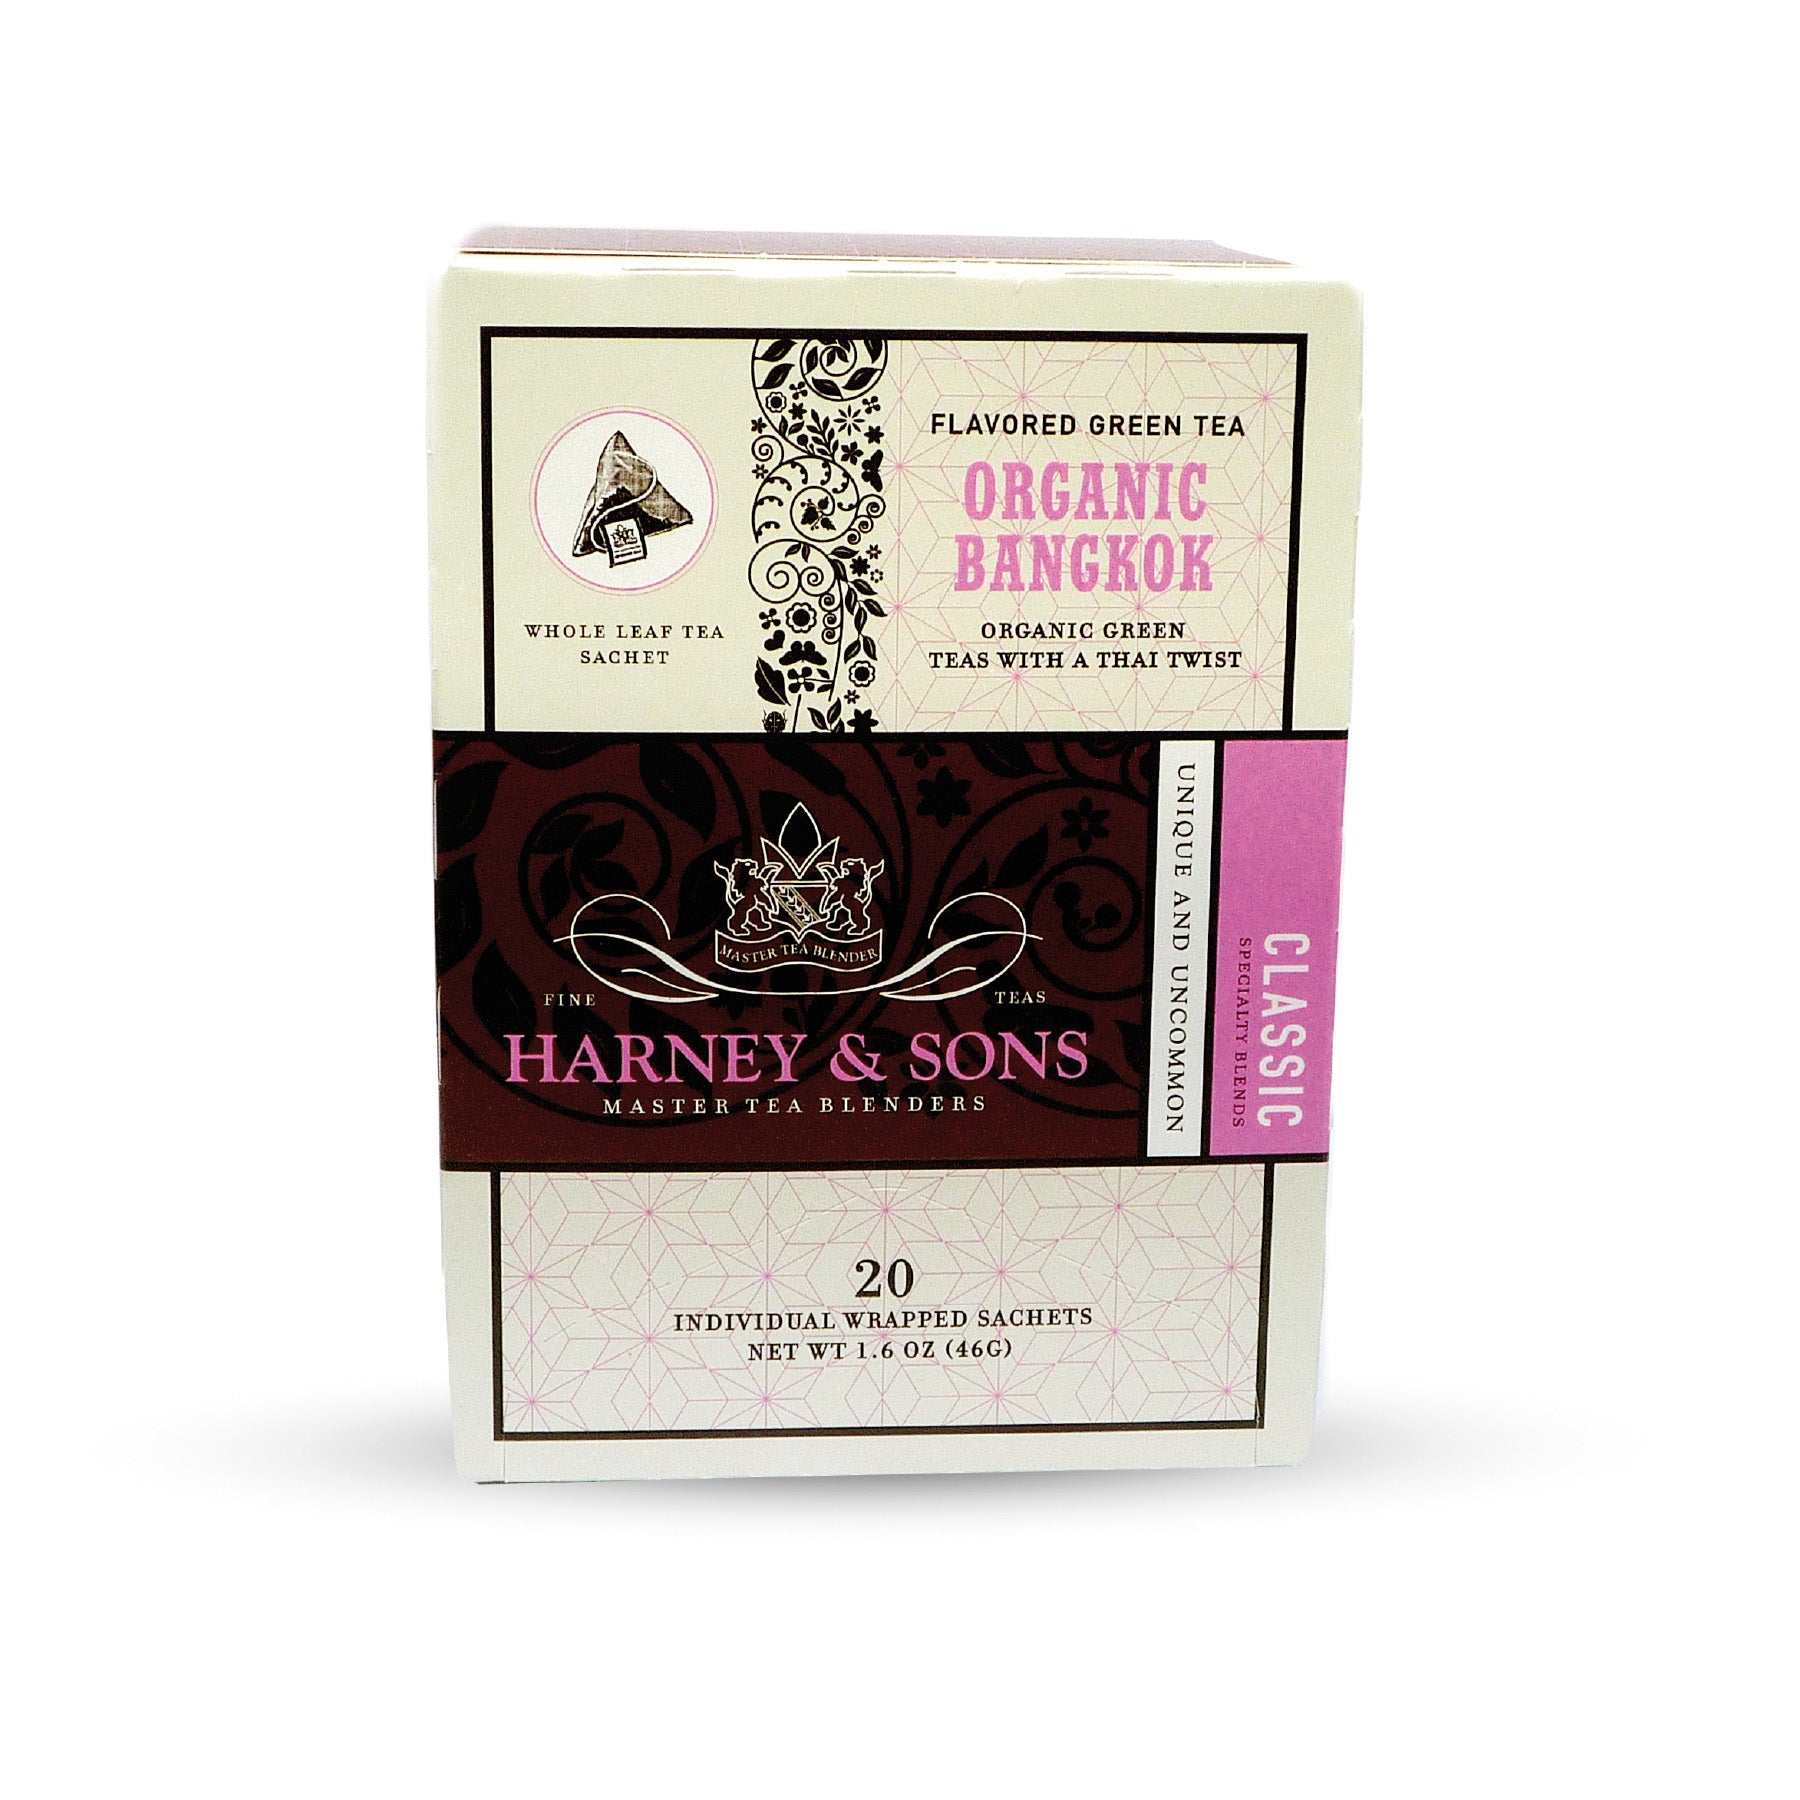 Green tea with lemongrass,  flavoured vanilla, coconut and ginger - Organic Certified -  Organic Bangkok, Box of 20 Individually Wrapped Sachets - Harney & Sons Fine Teas Europe